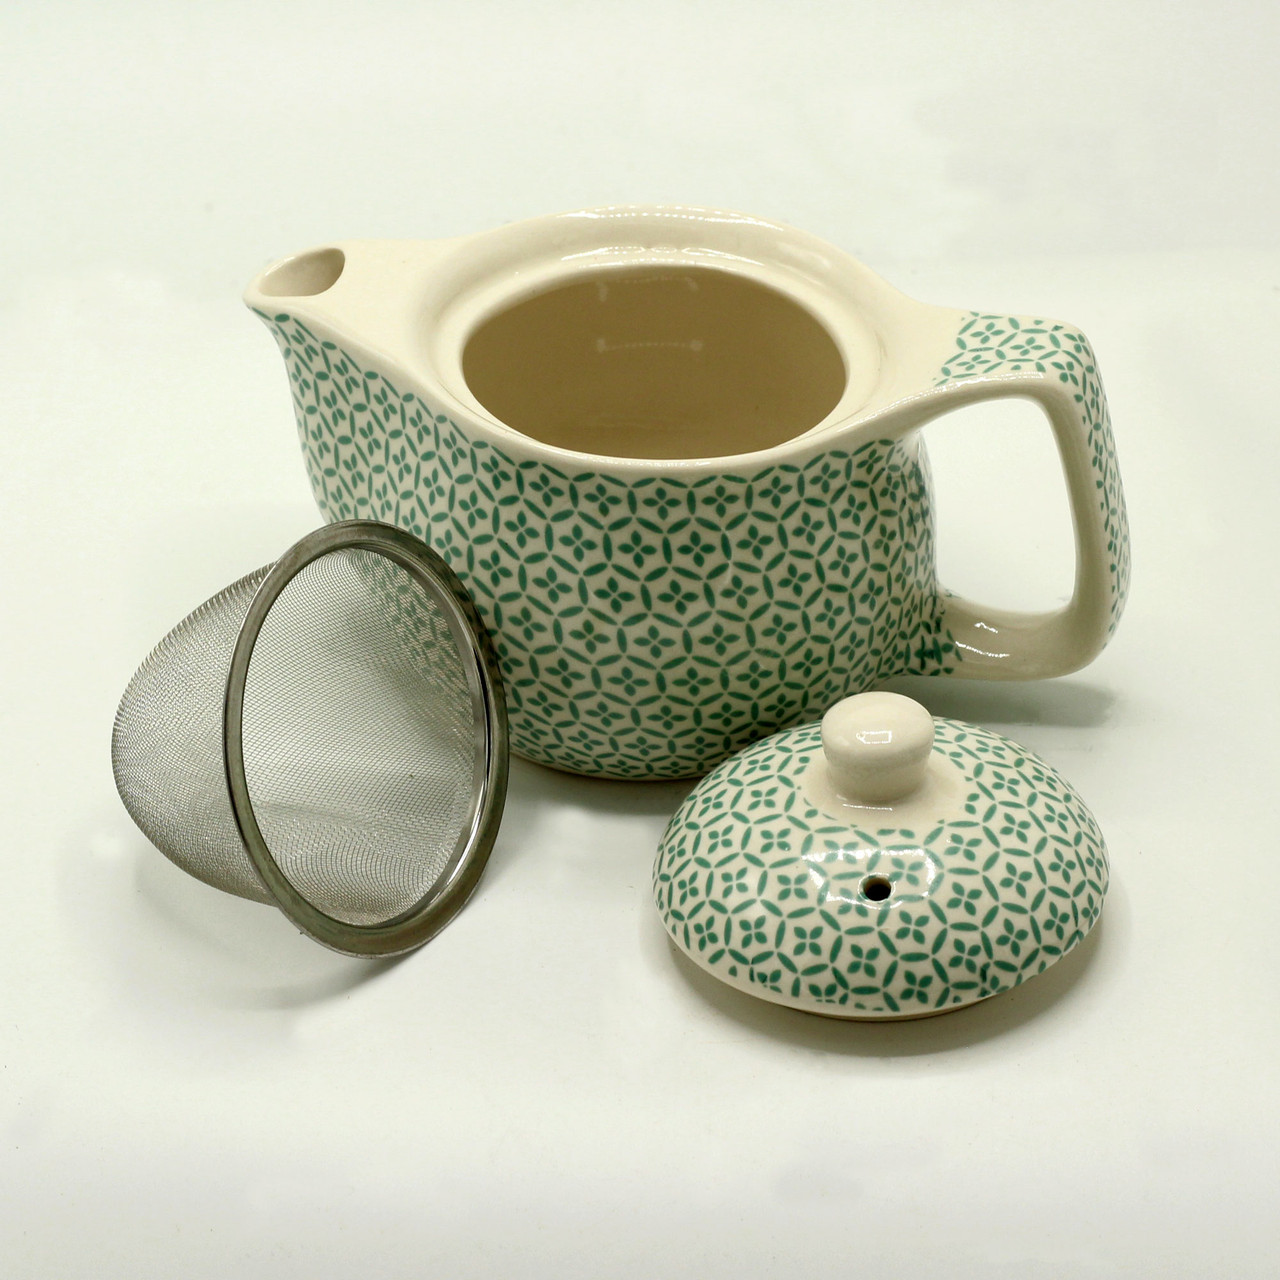 Small Teapot with a Green Mosaic Design